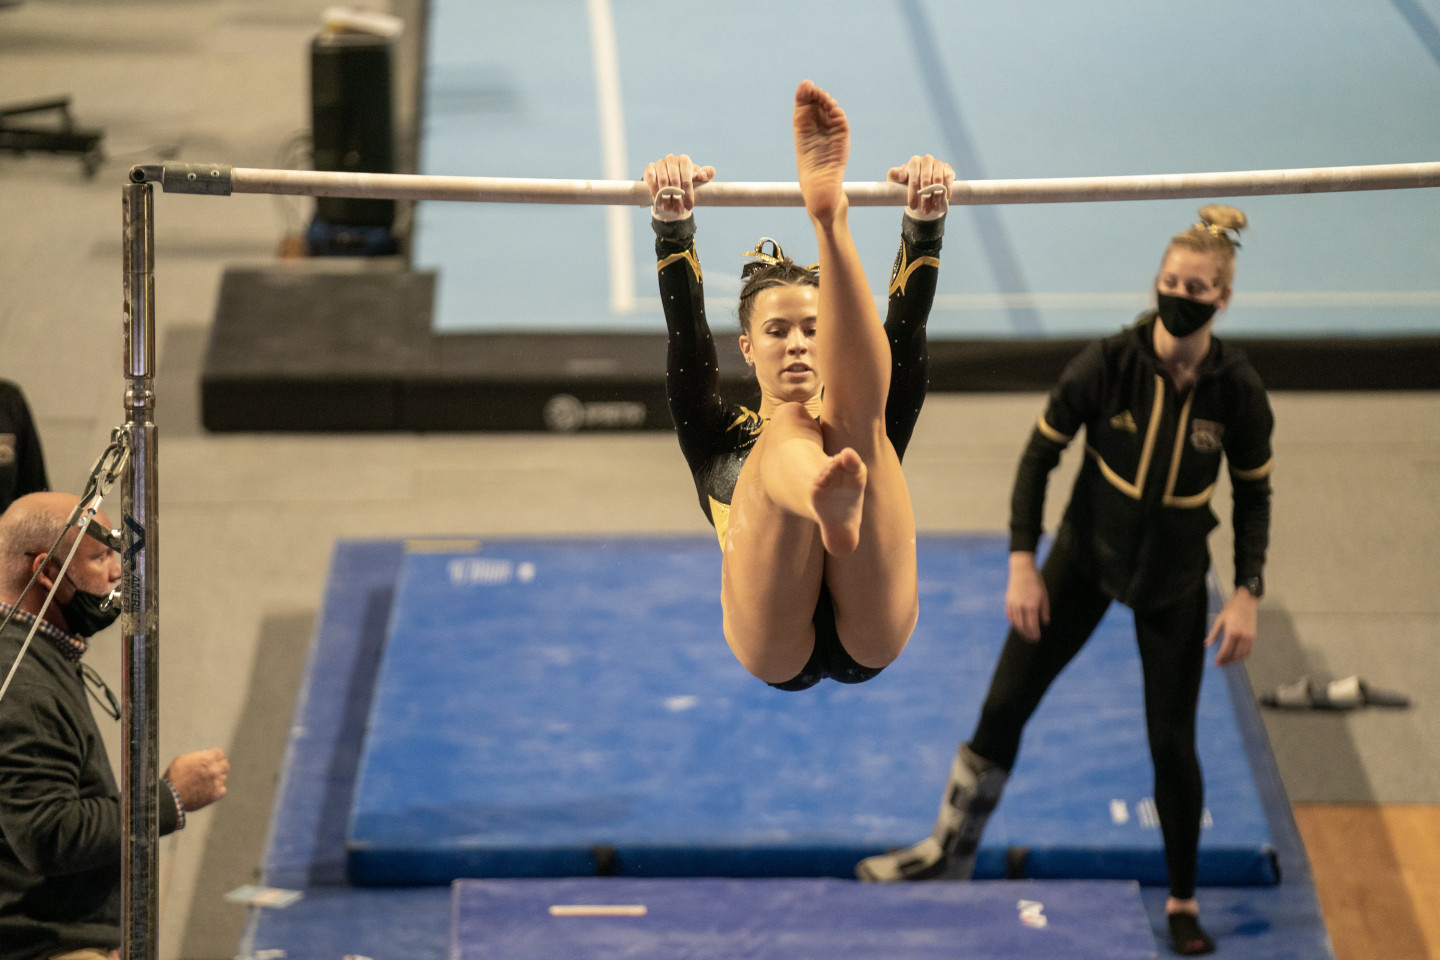 Payton Murphy performs a gymnastics routine on the bars.